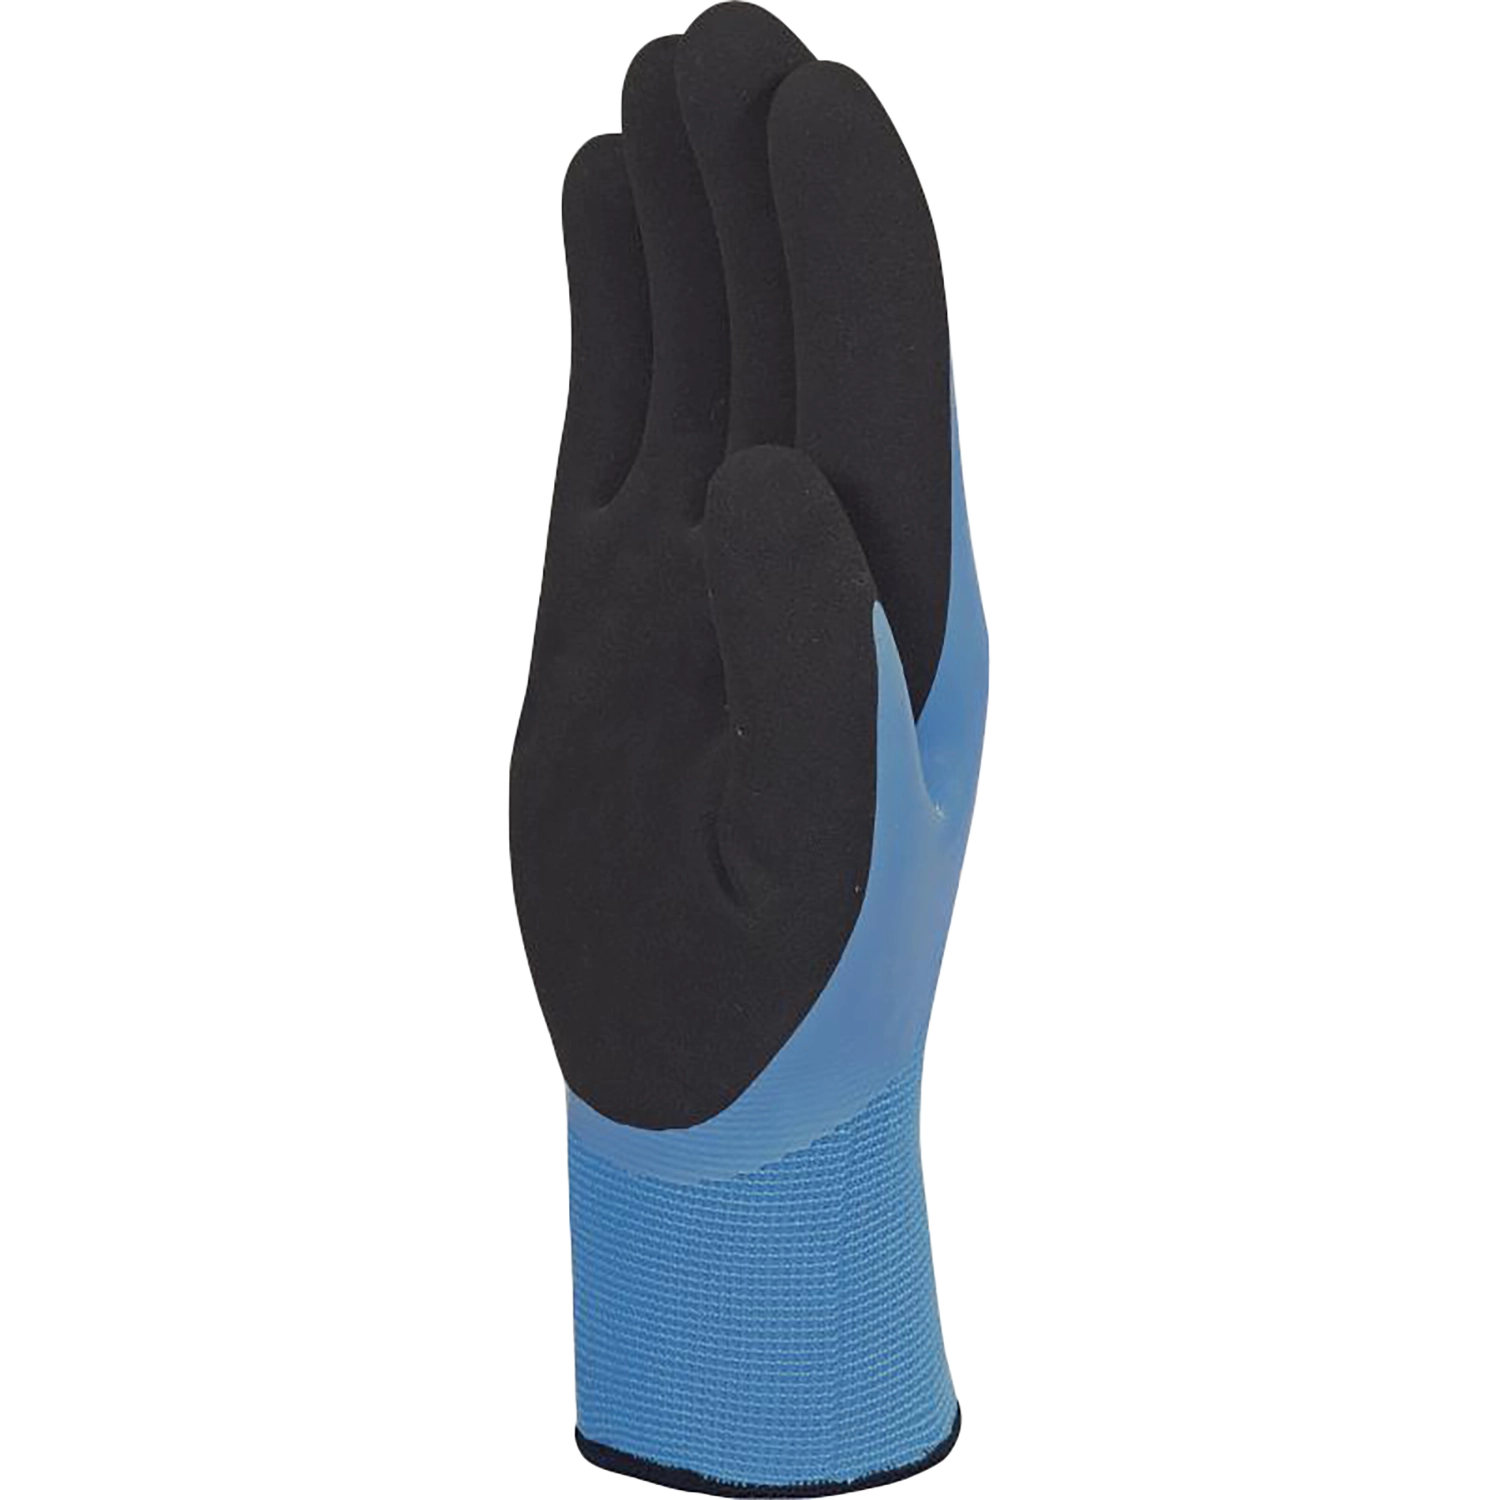 Gants d'hiver acrylique/polyamide - Thrym - taille 9